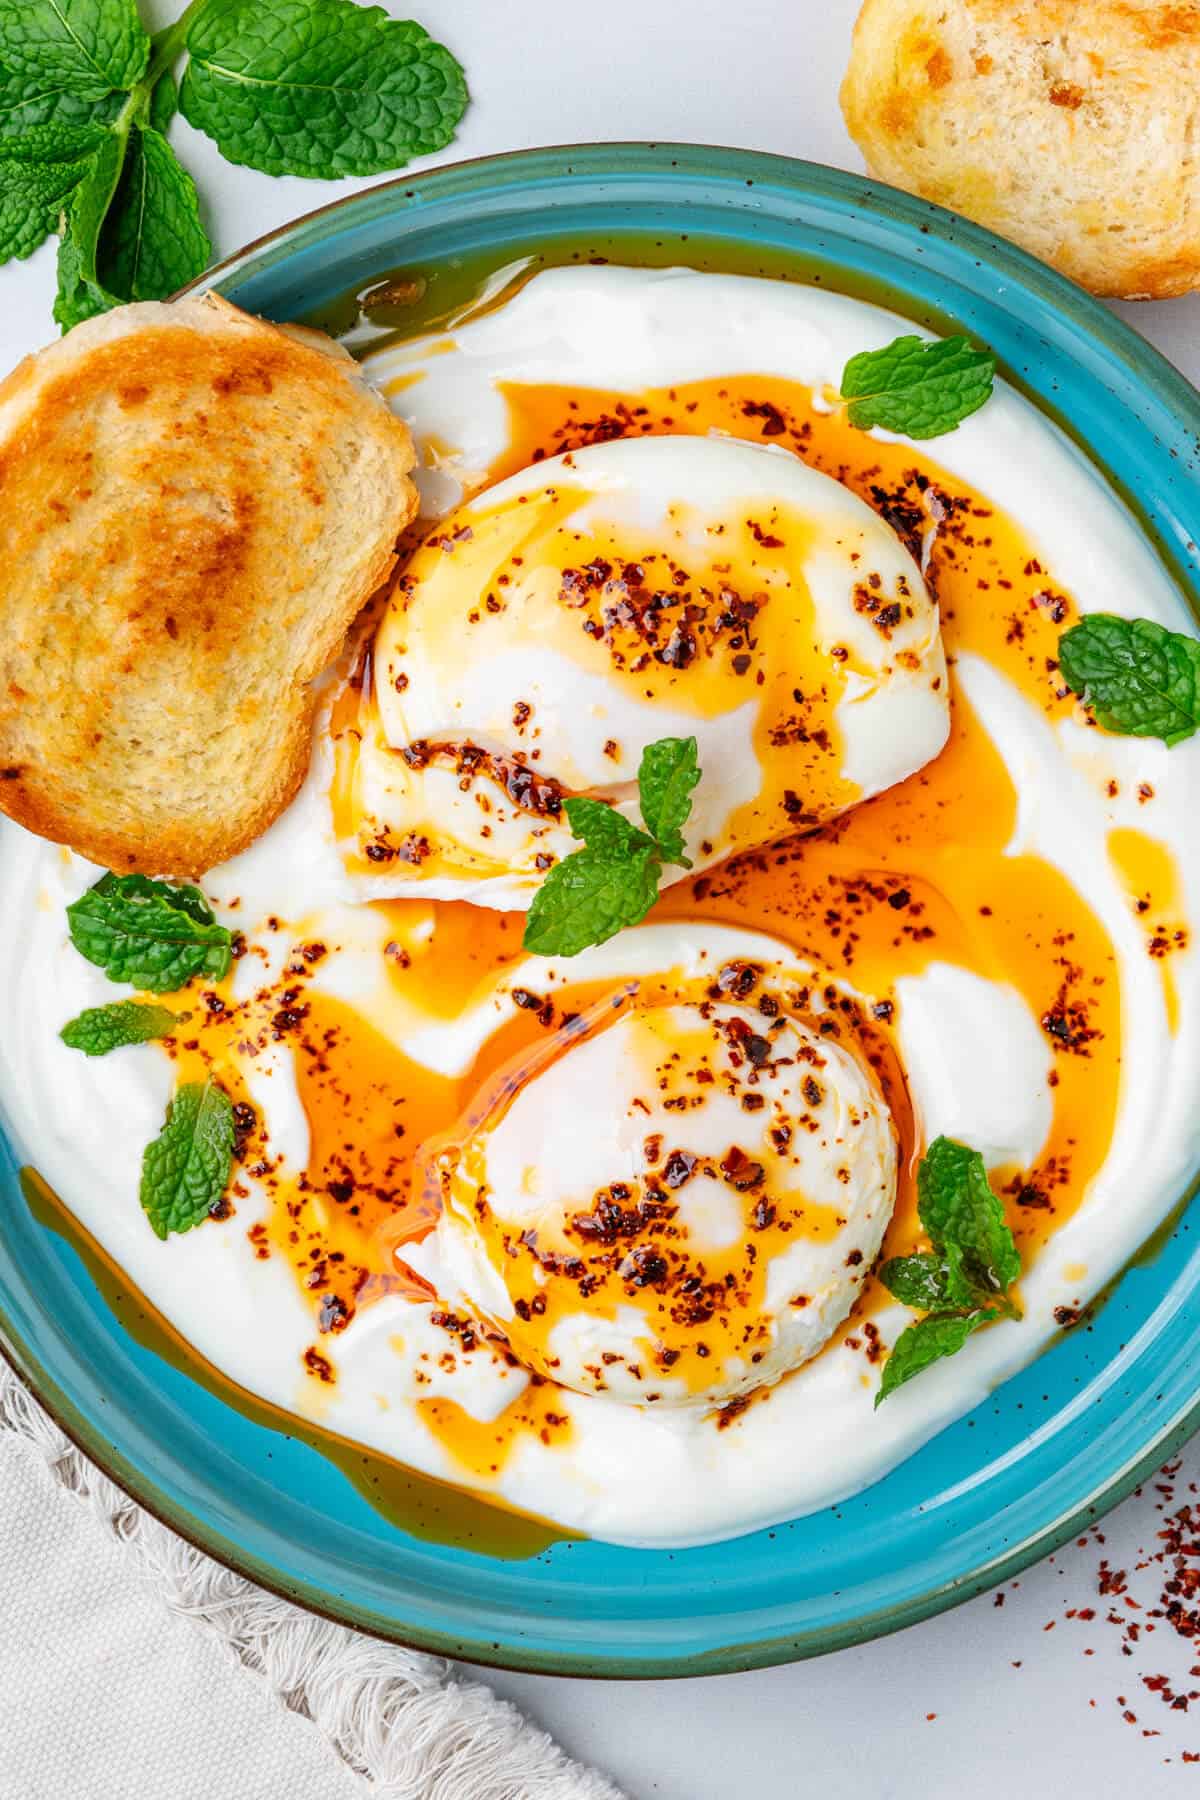 Turkish eggs with fresh mint and toasted bread